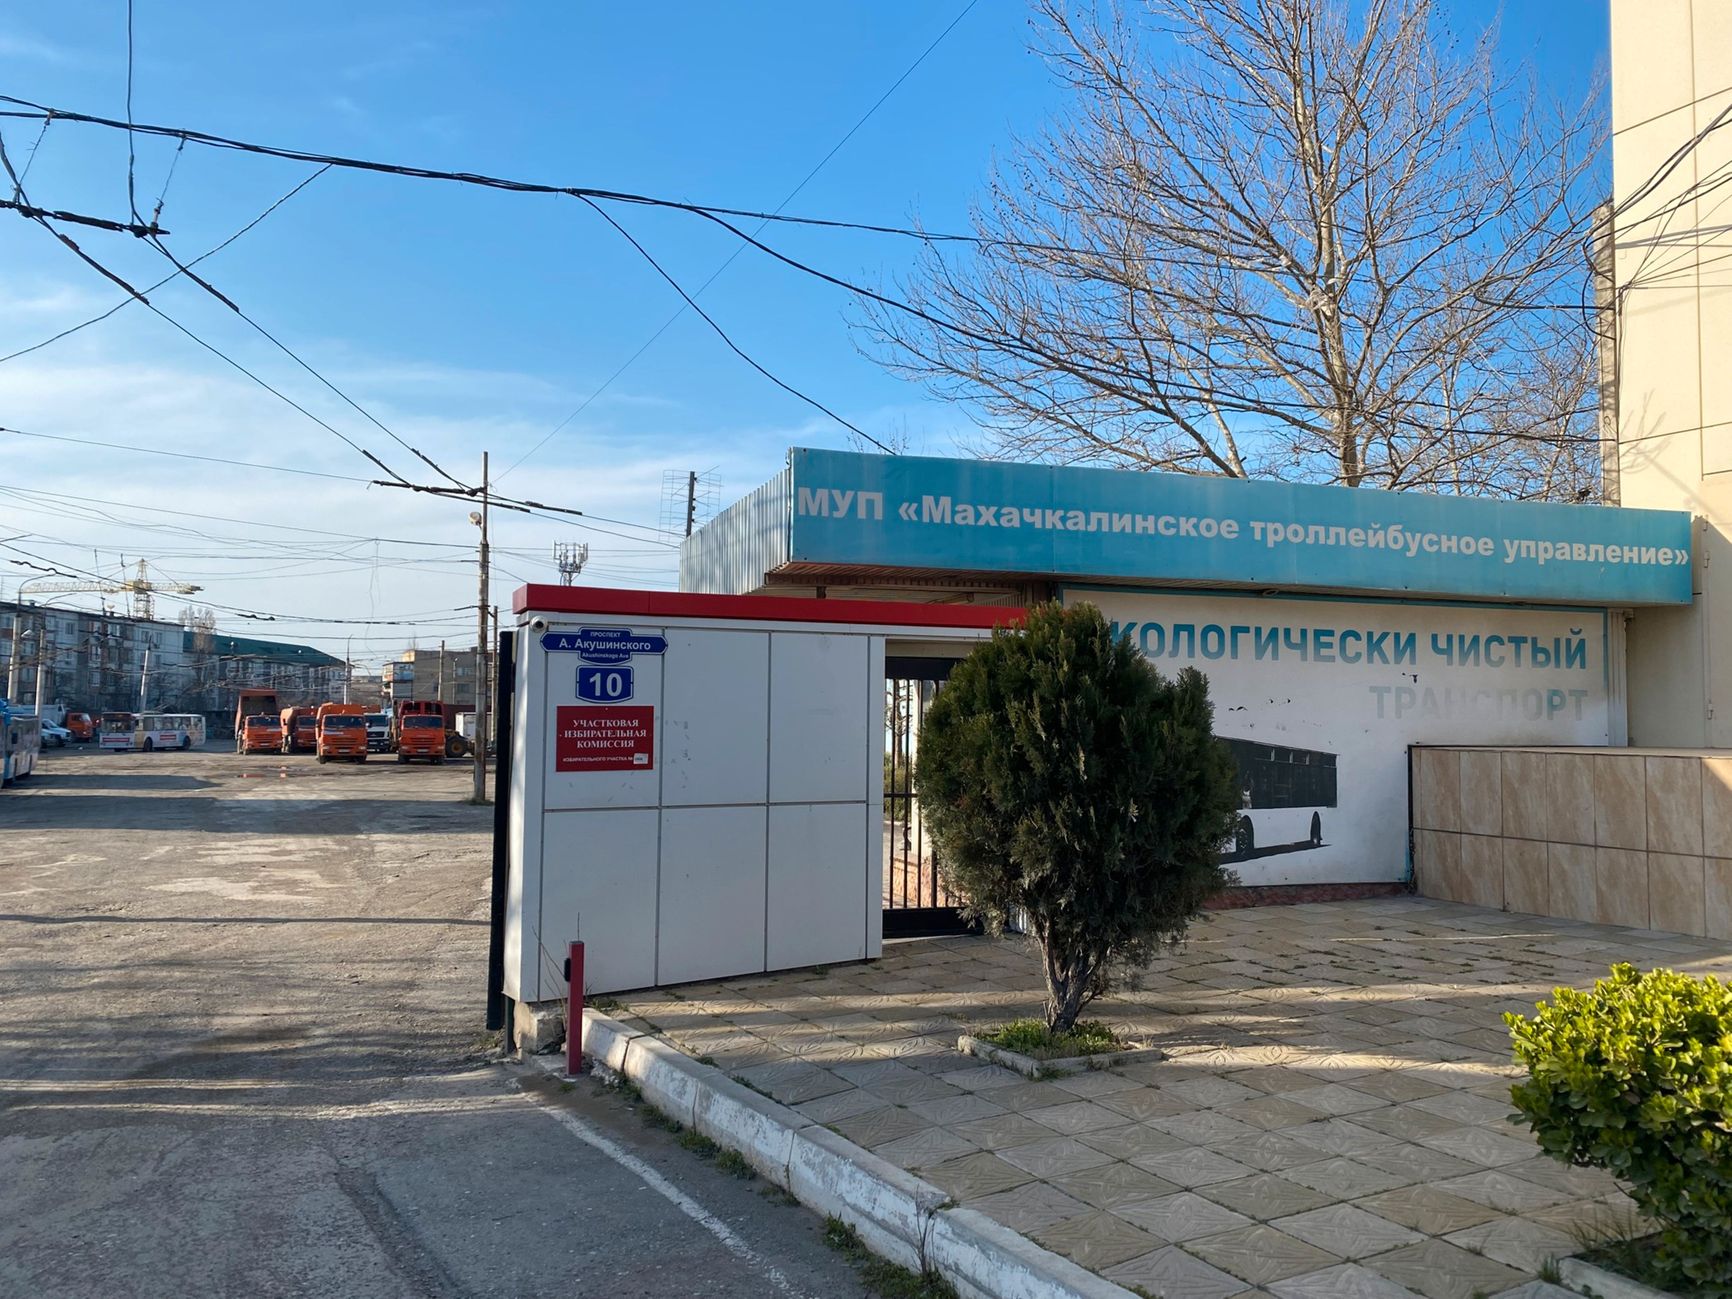 The trolleybus depot in Makhachkala where a mining farm was set up